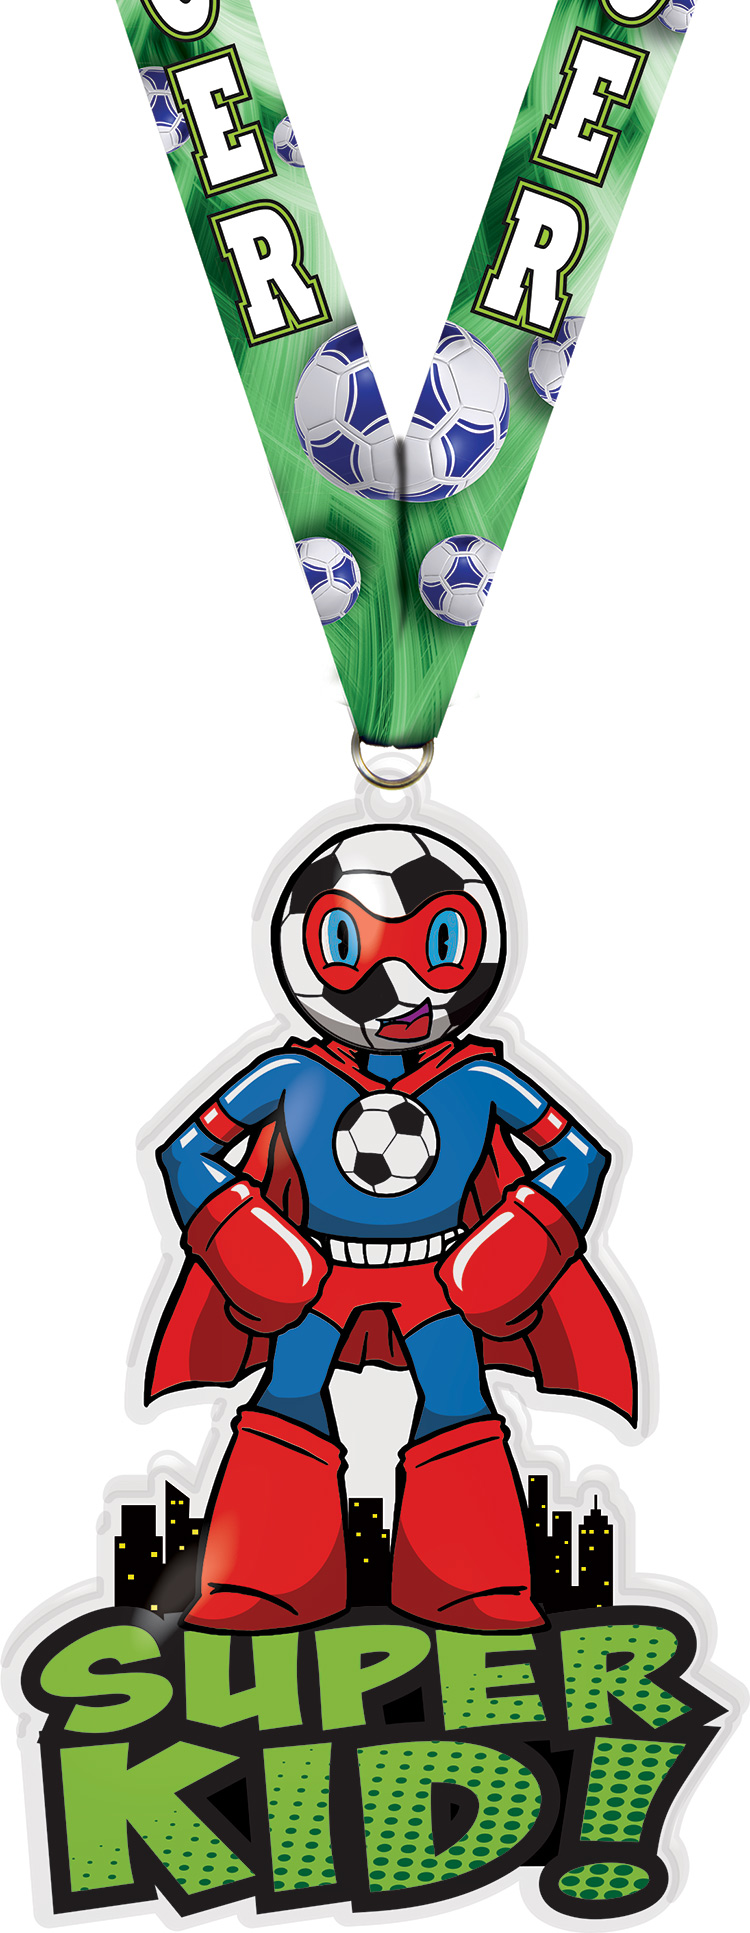 Exclusive Soccer Super Kid Acrylic Medal- 4 inch